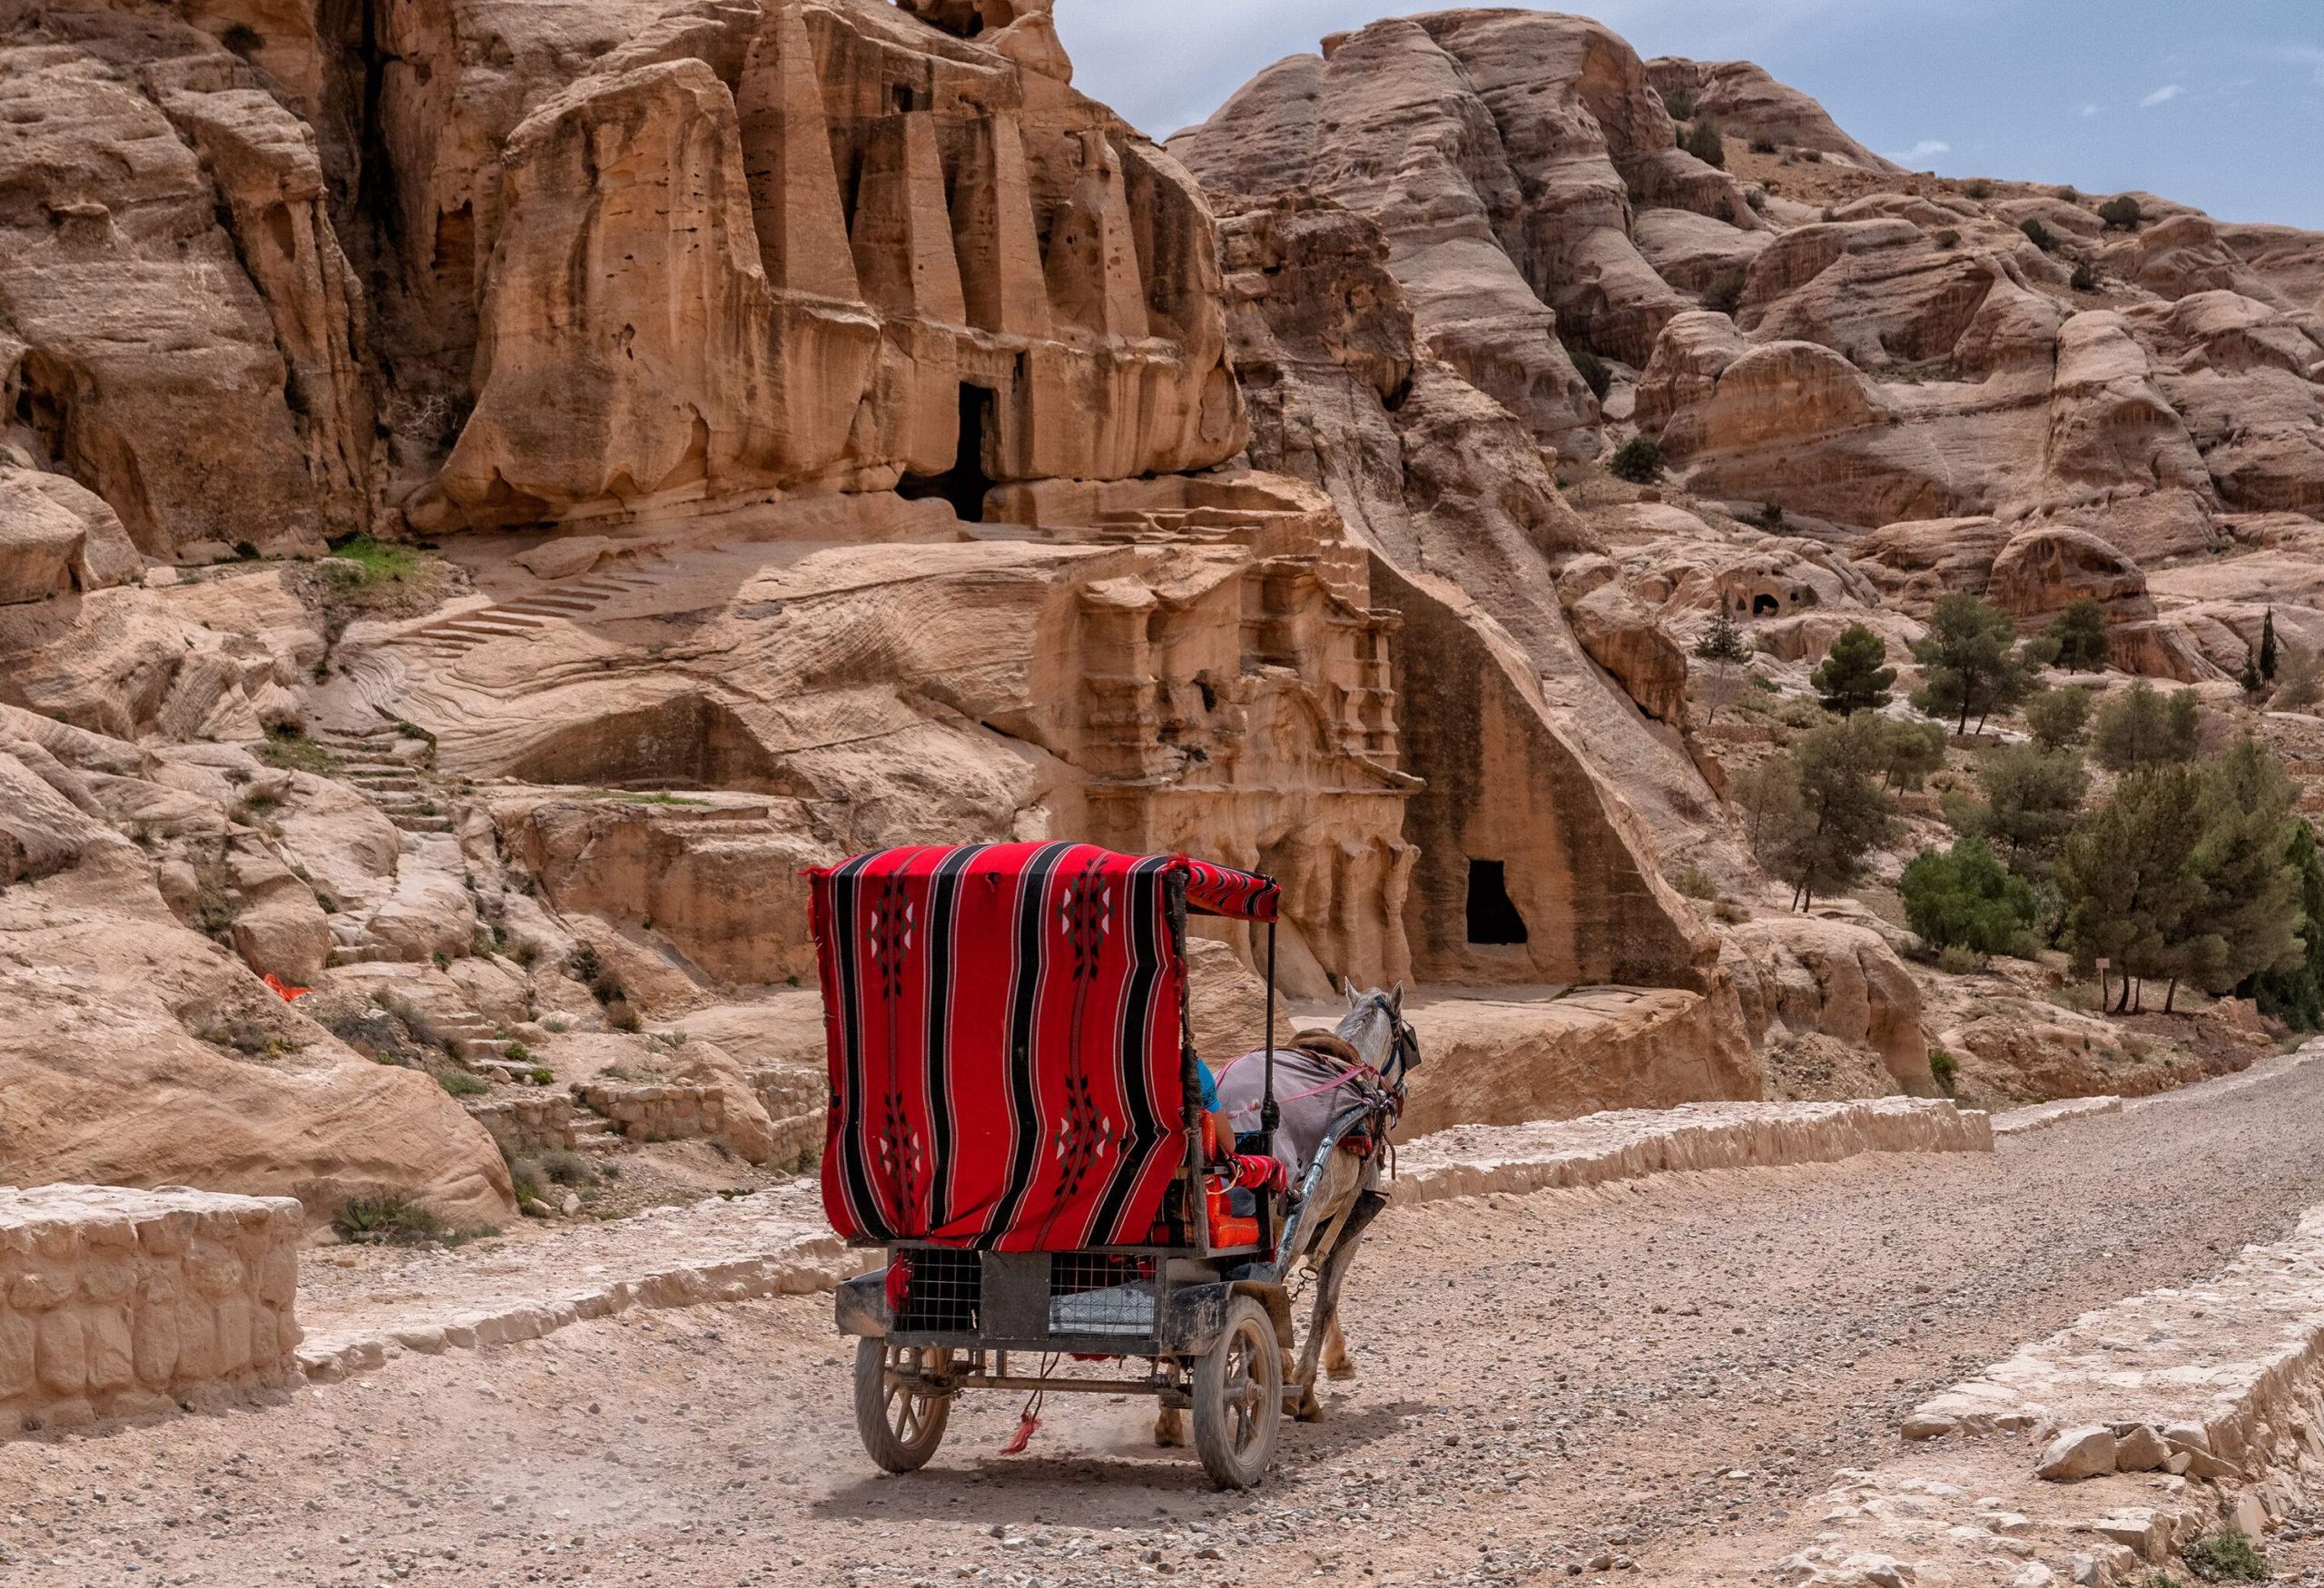 A carriage travels along a road amidst the granite rock formations of the desert.